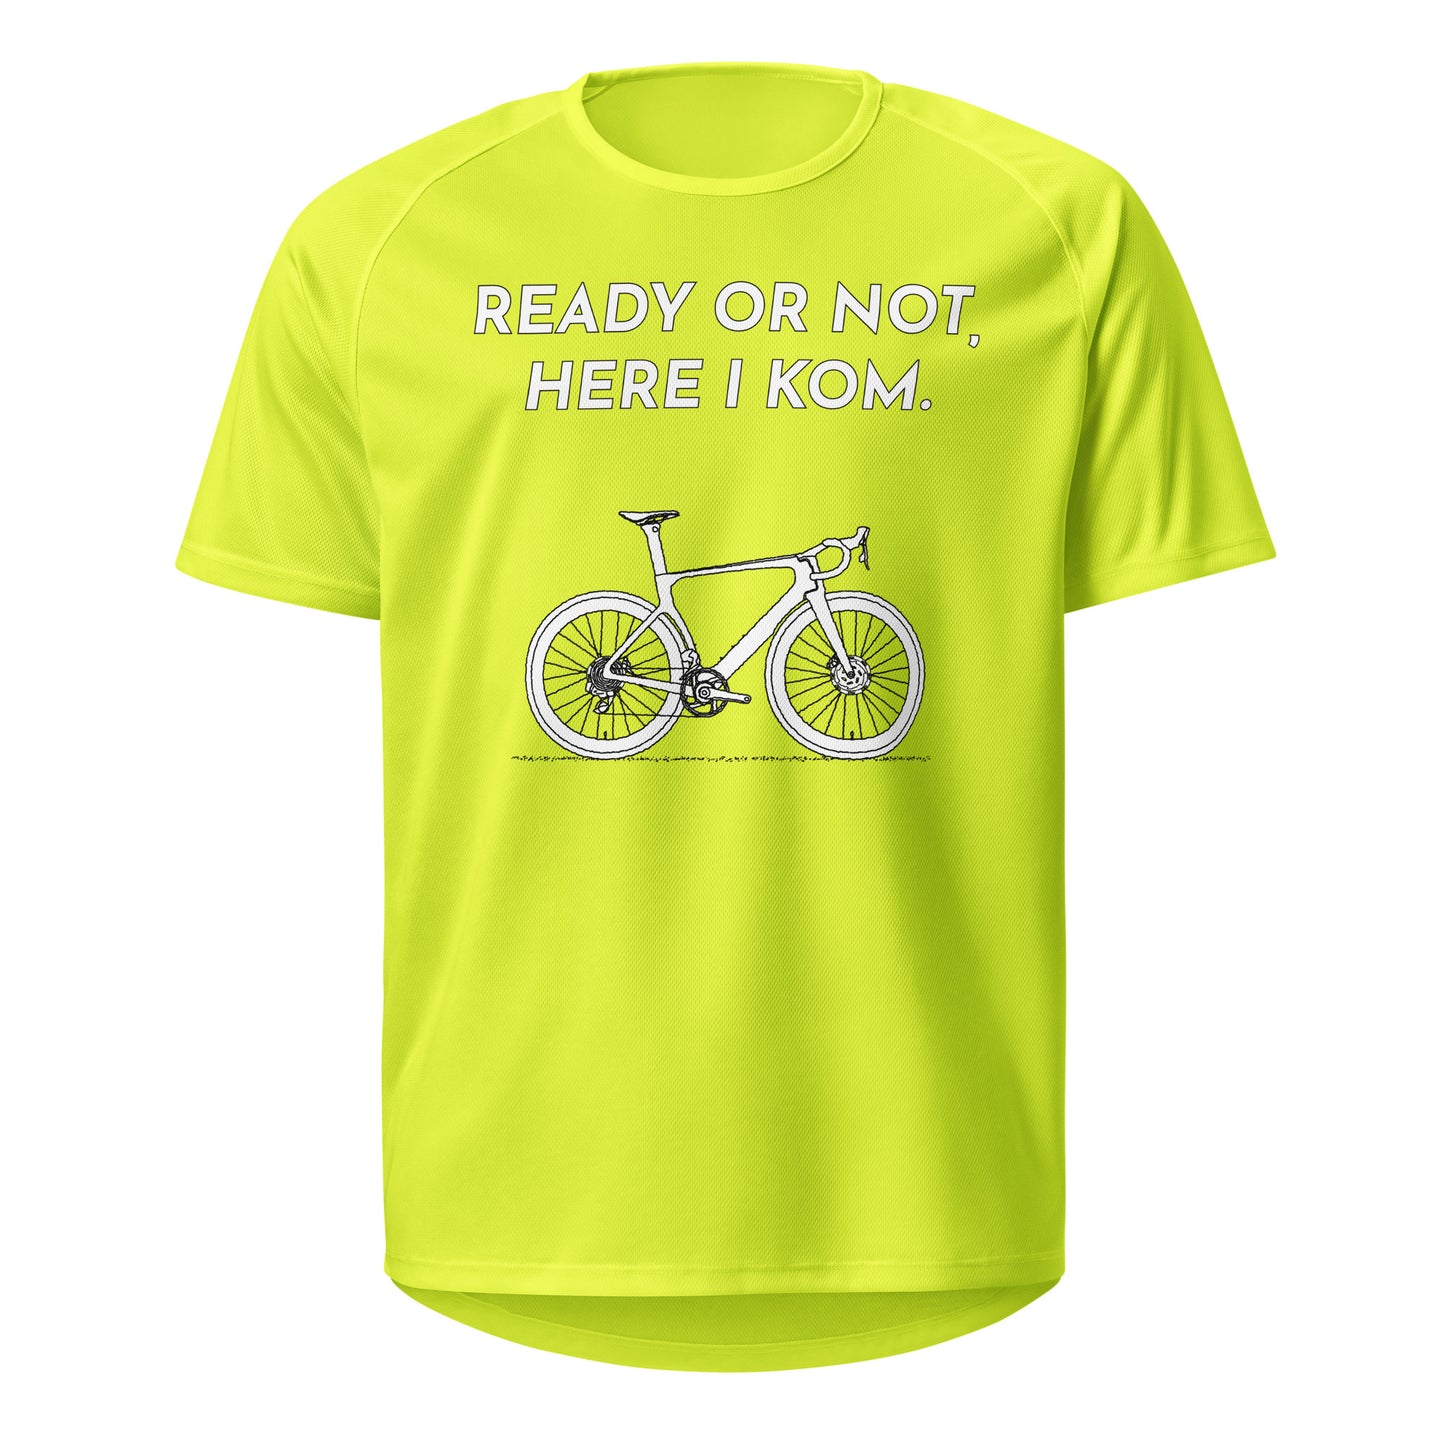 Ready Or Not Here I KOM Bicycle Sports Jersey, Adult